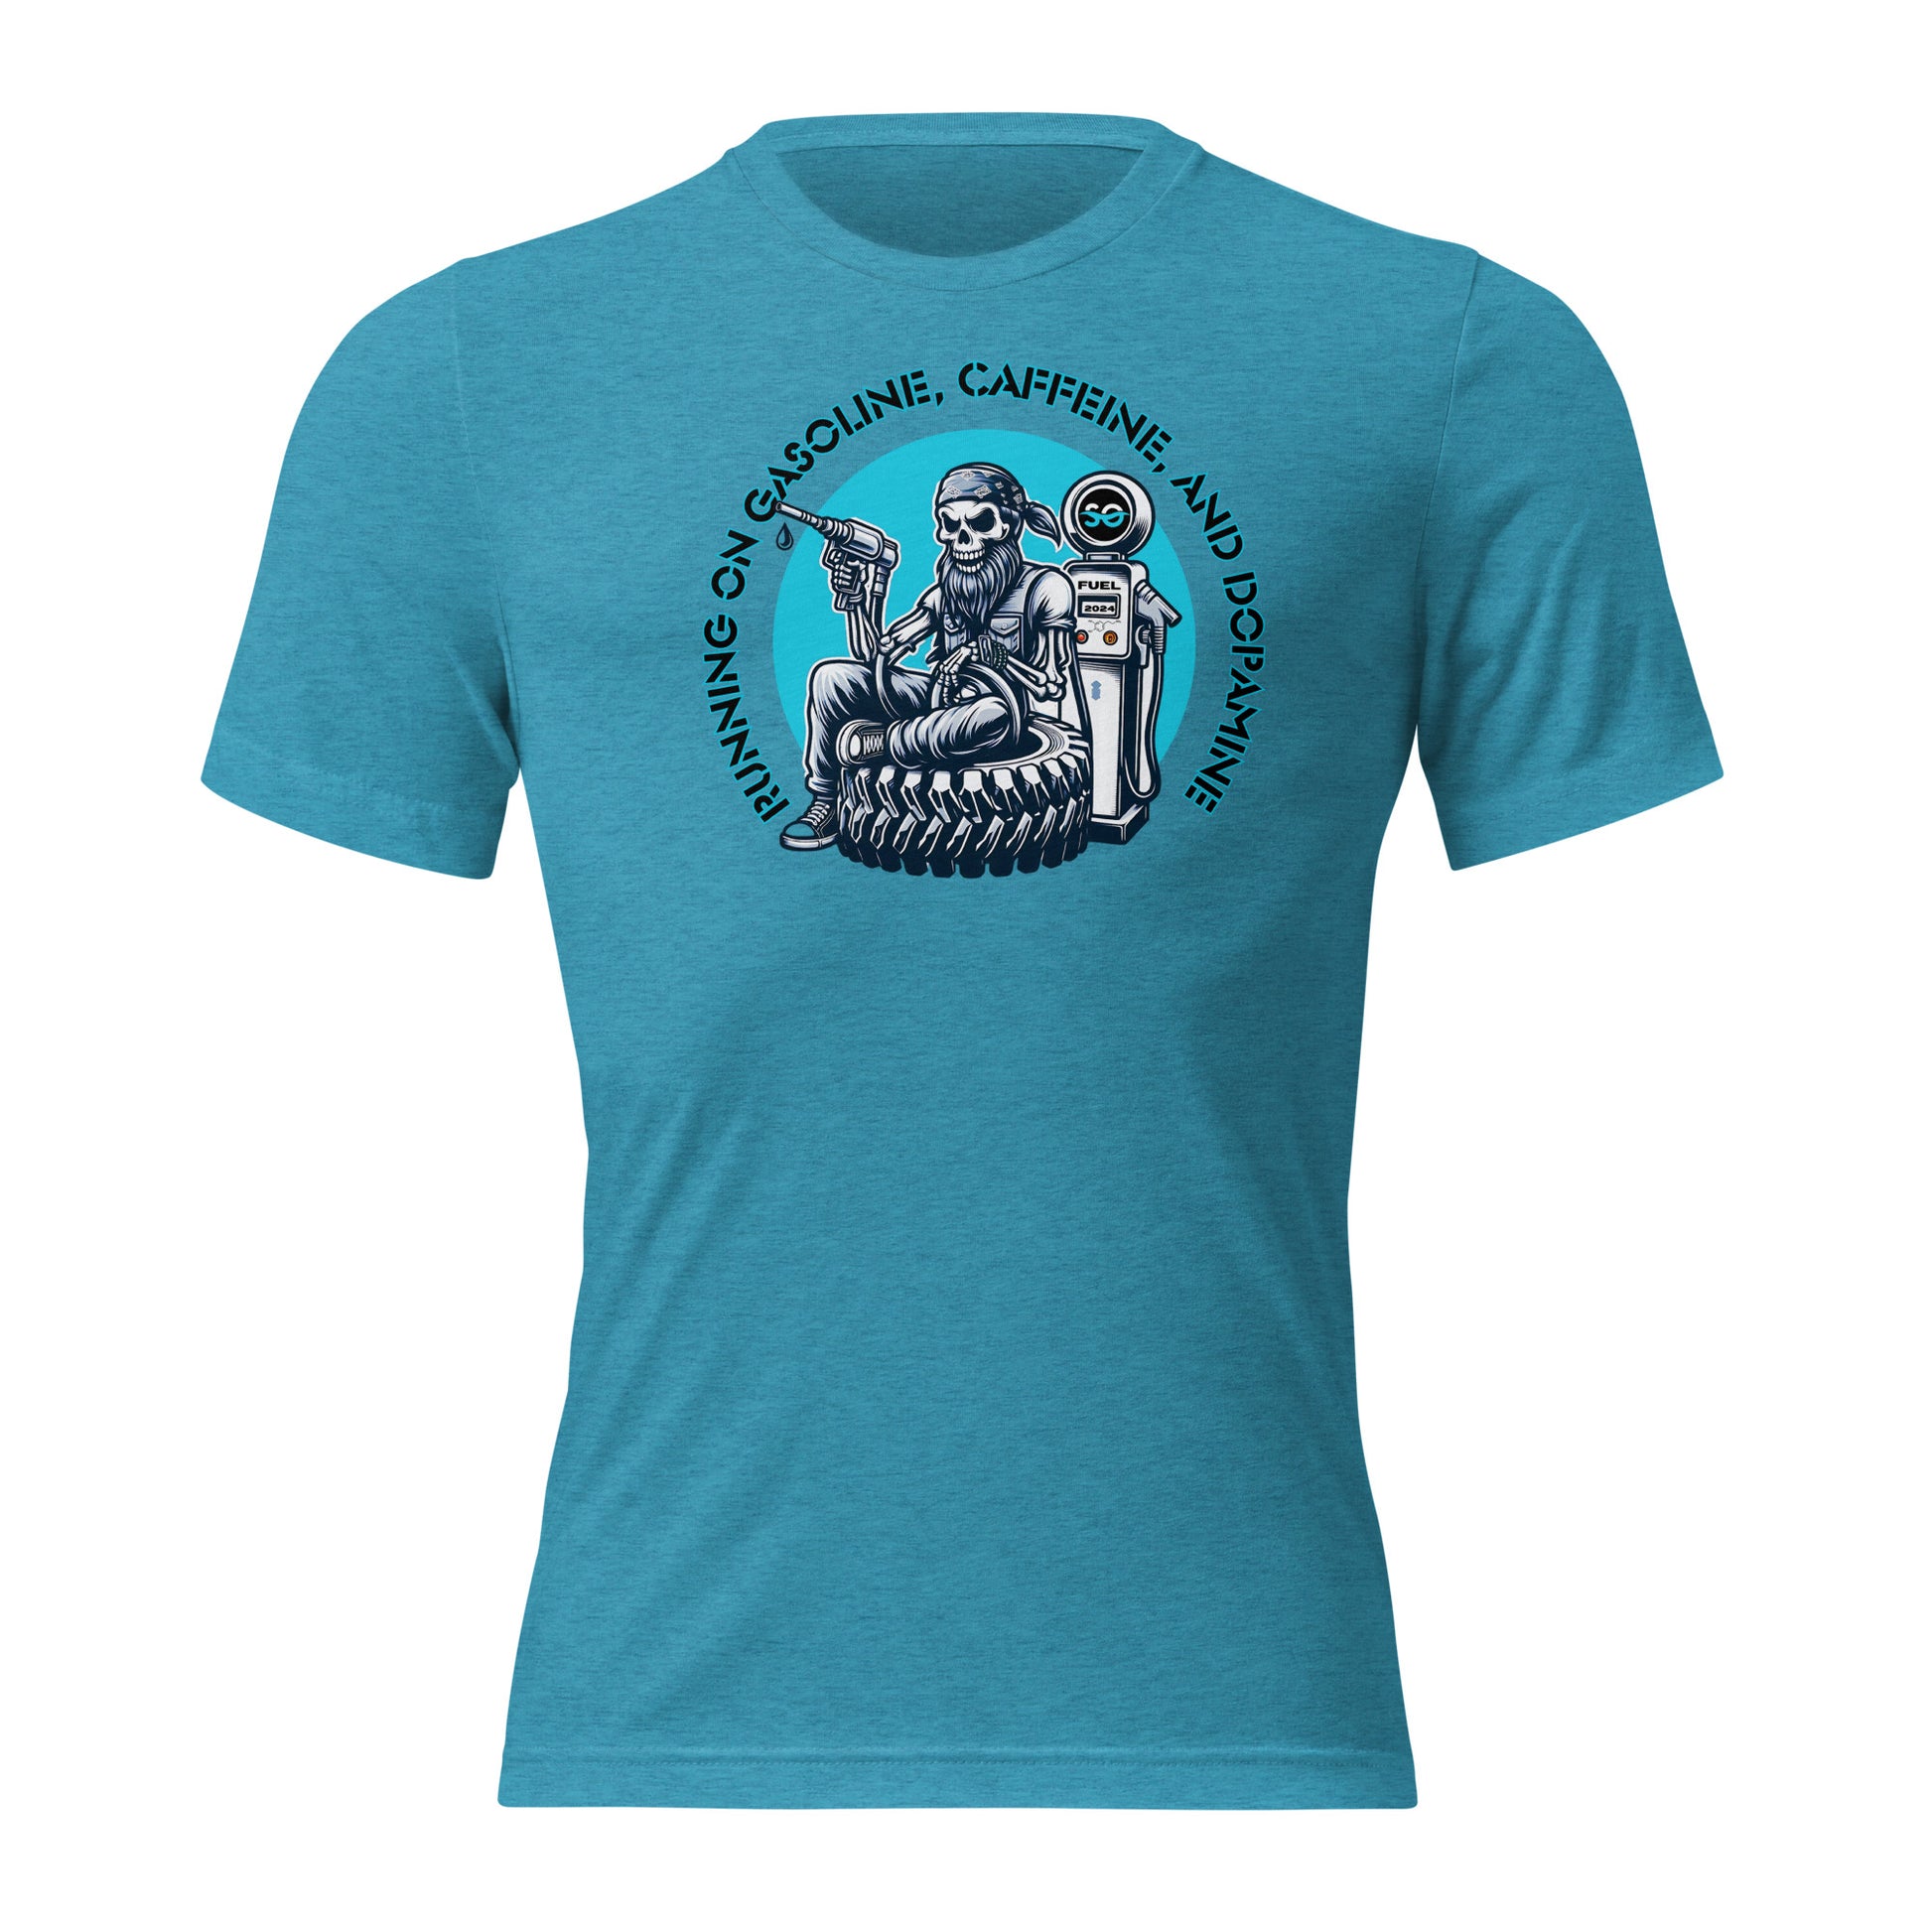 a blue t - shirt with an image of a man on a motorcycle